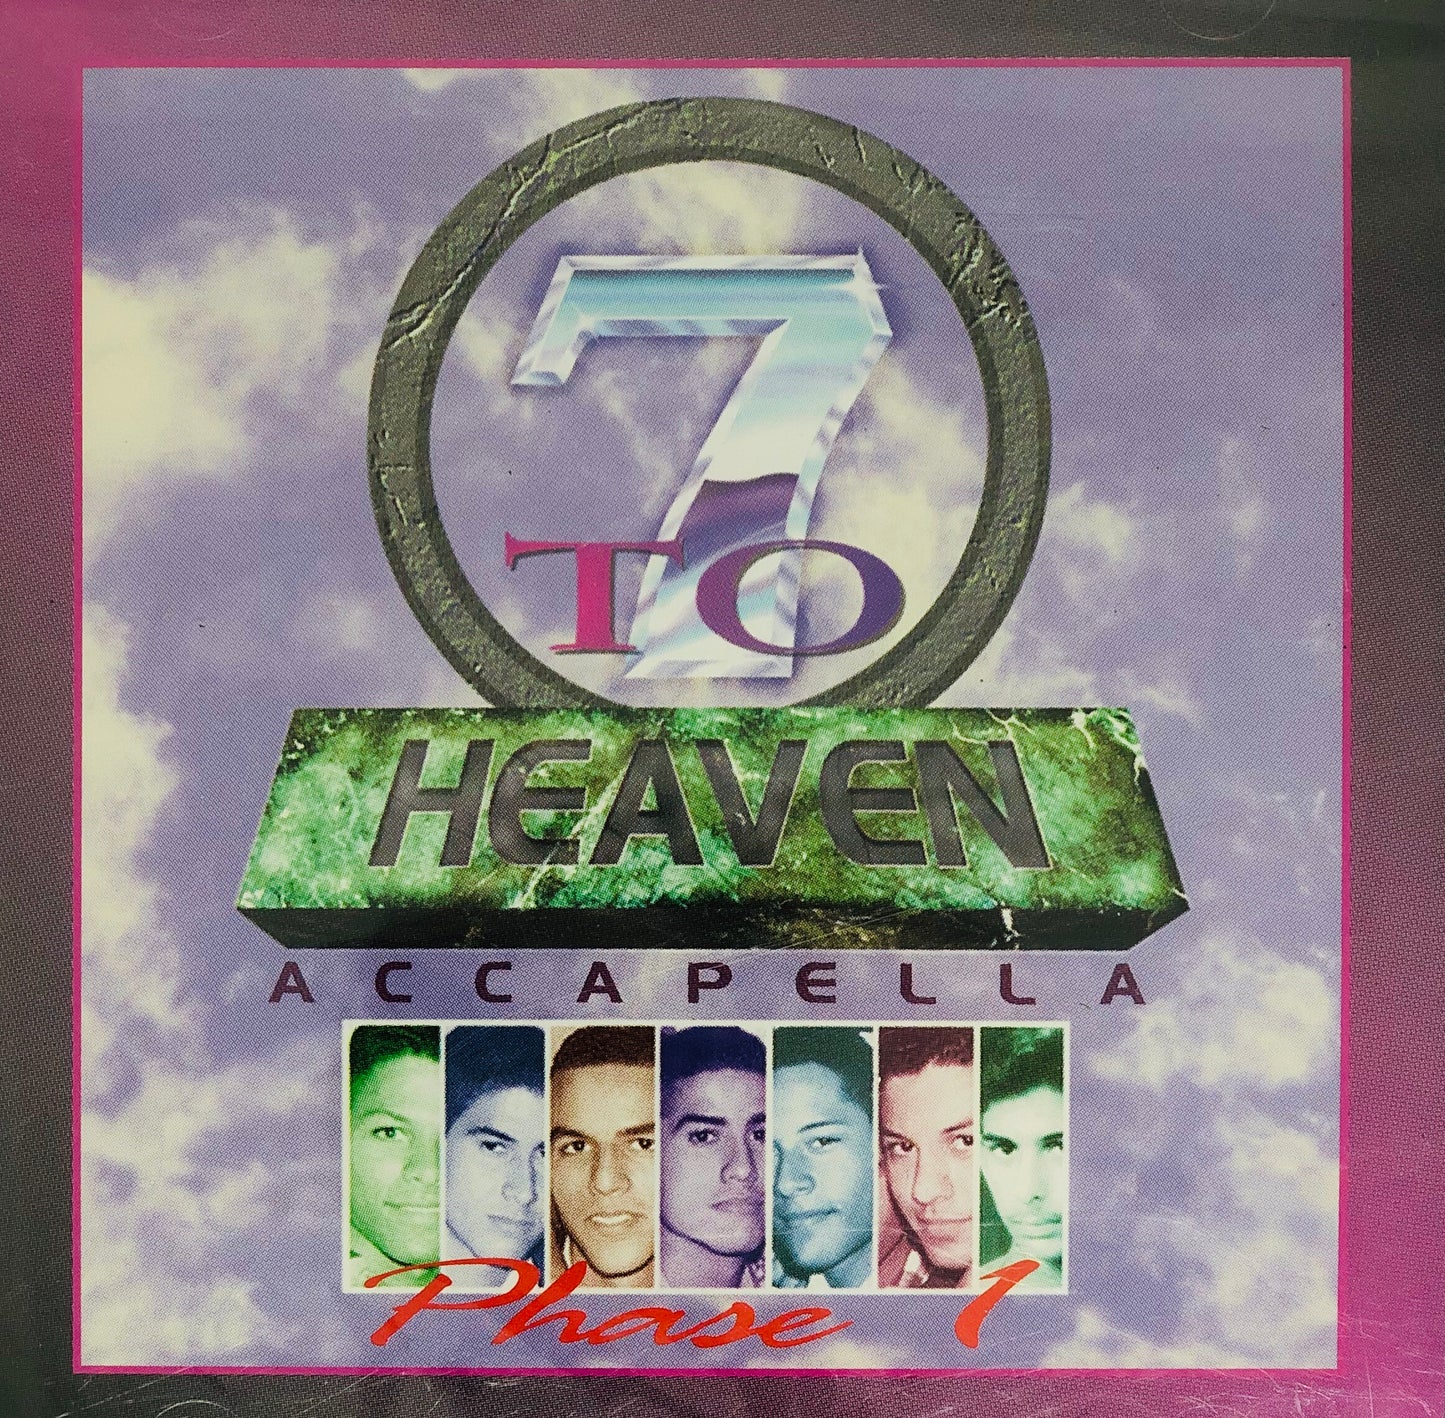 CD - Acappella Phase 1 - 7 to Heaven